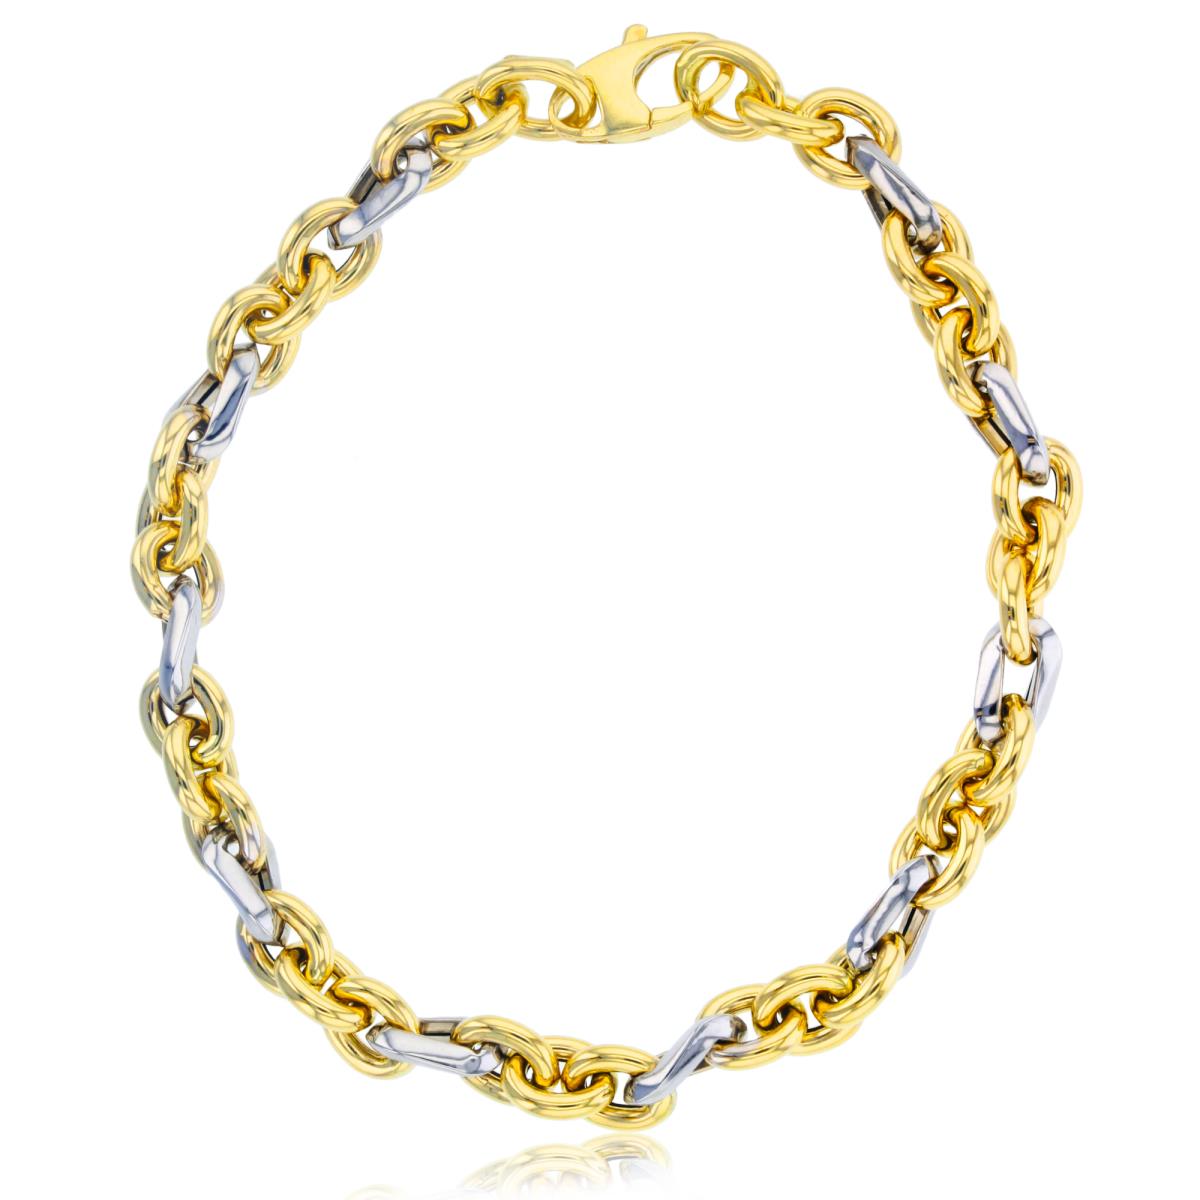 14K Two-Tone Gold Polished Twist Cable 7.75" Chain Bracelet